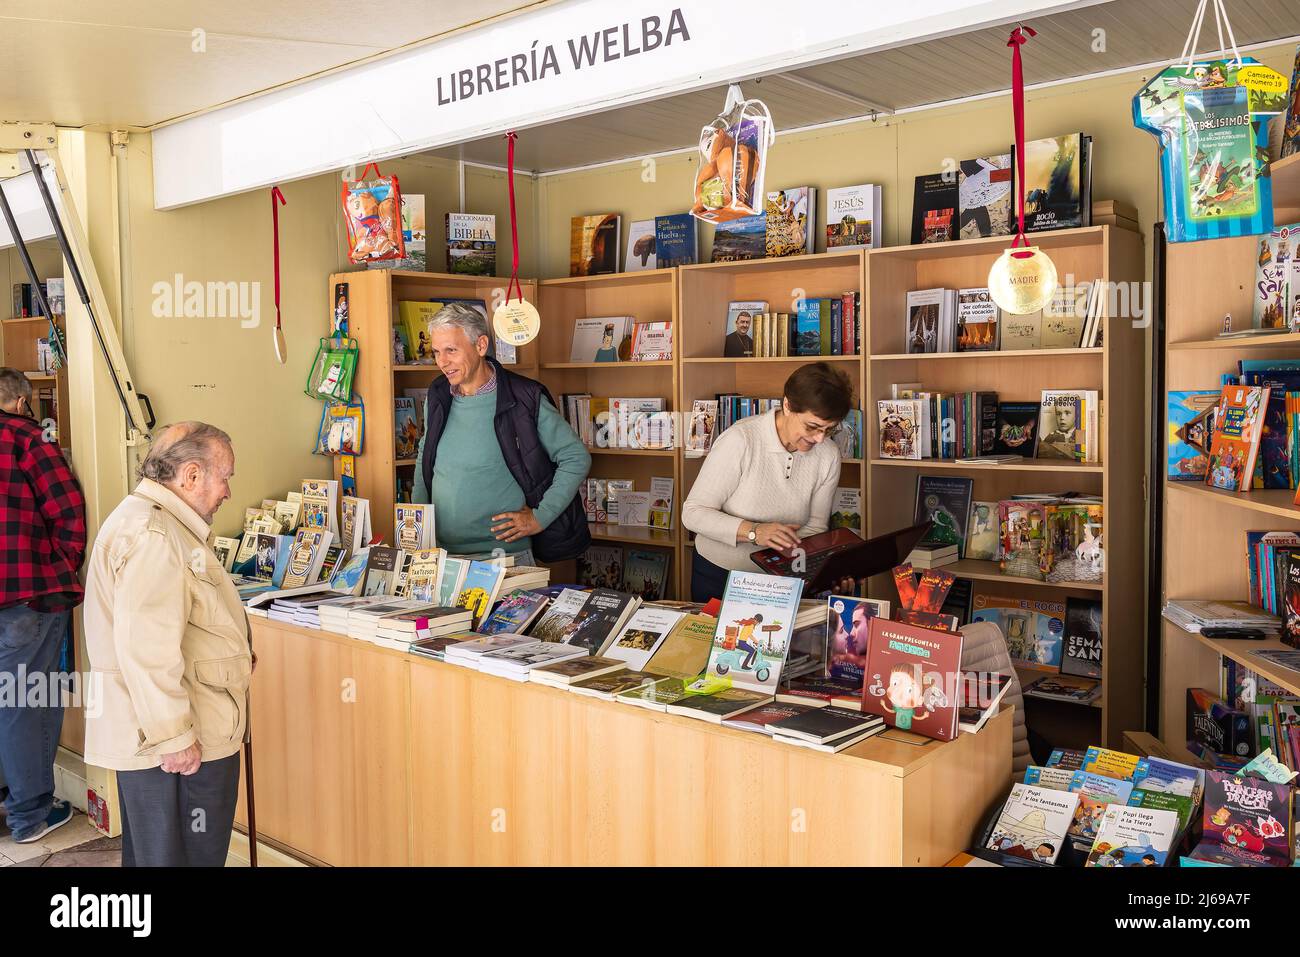 Huelva, Spain - April 24, 2022: Stand of  the 46th edition of the Book Fair located in the central Plaza de las Monjas (Square of the Nuns) of the cit Stock Photo